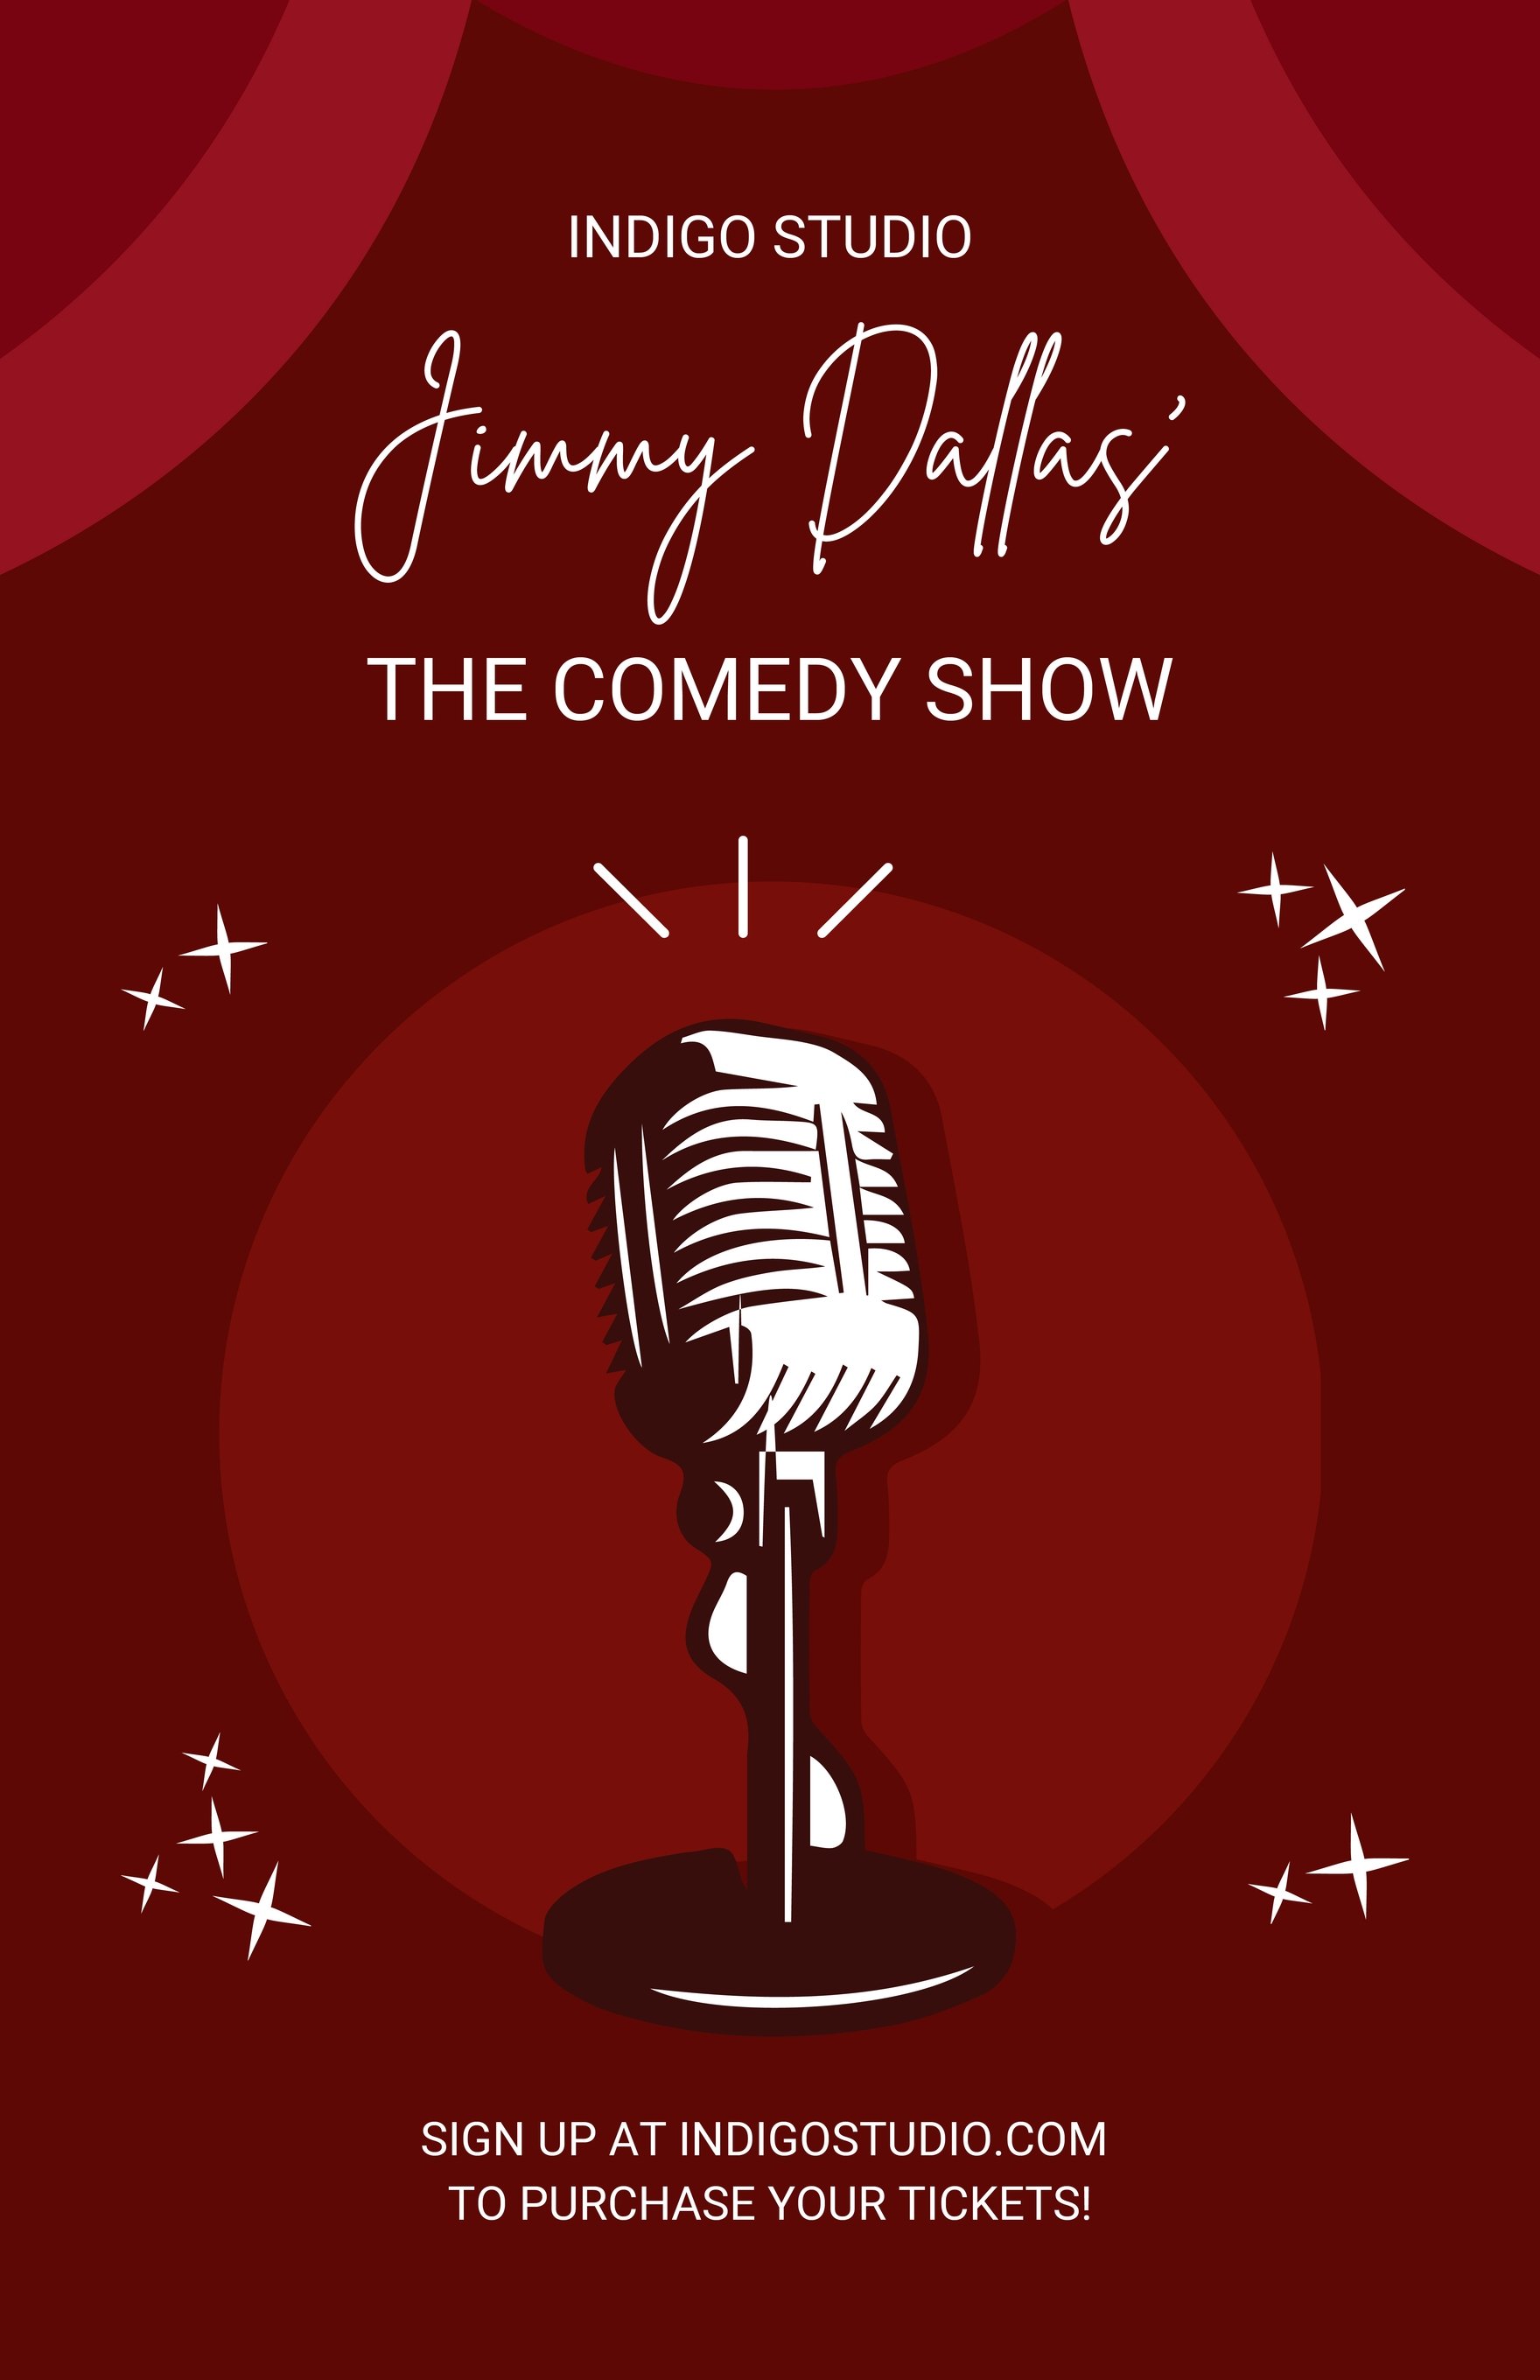 Creative Comedy Show Poster